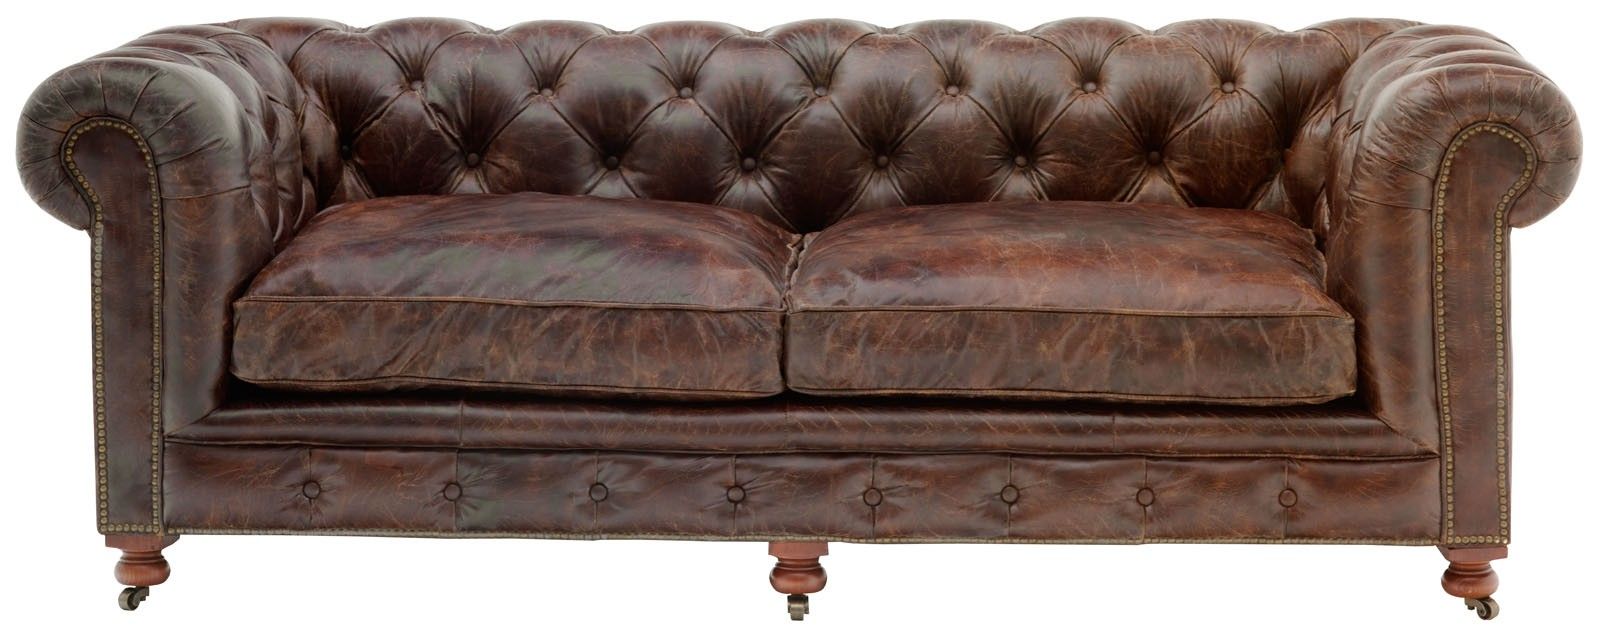 Great Leather Sofa Chair 71 In Sofas And Couches Ideas With Leather Intended For Andrew Leather Sofa Chairs (Photo 1 of 20)